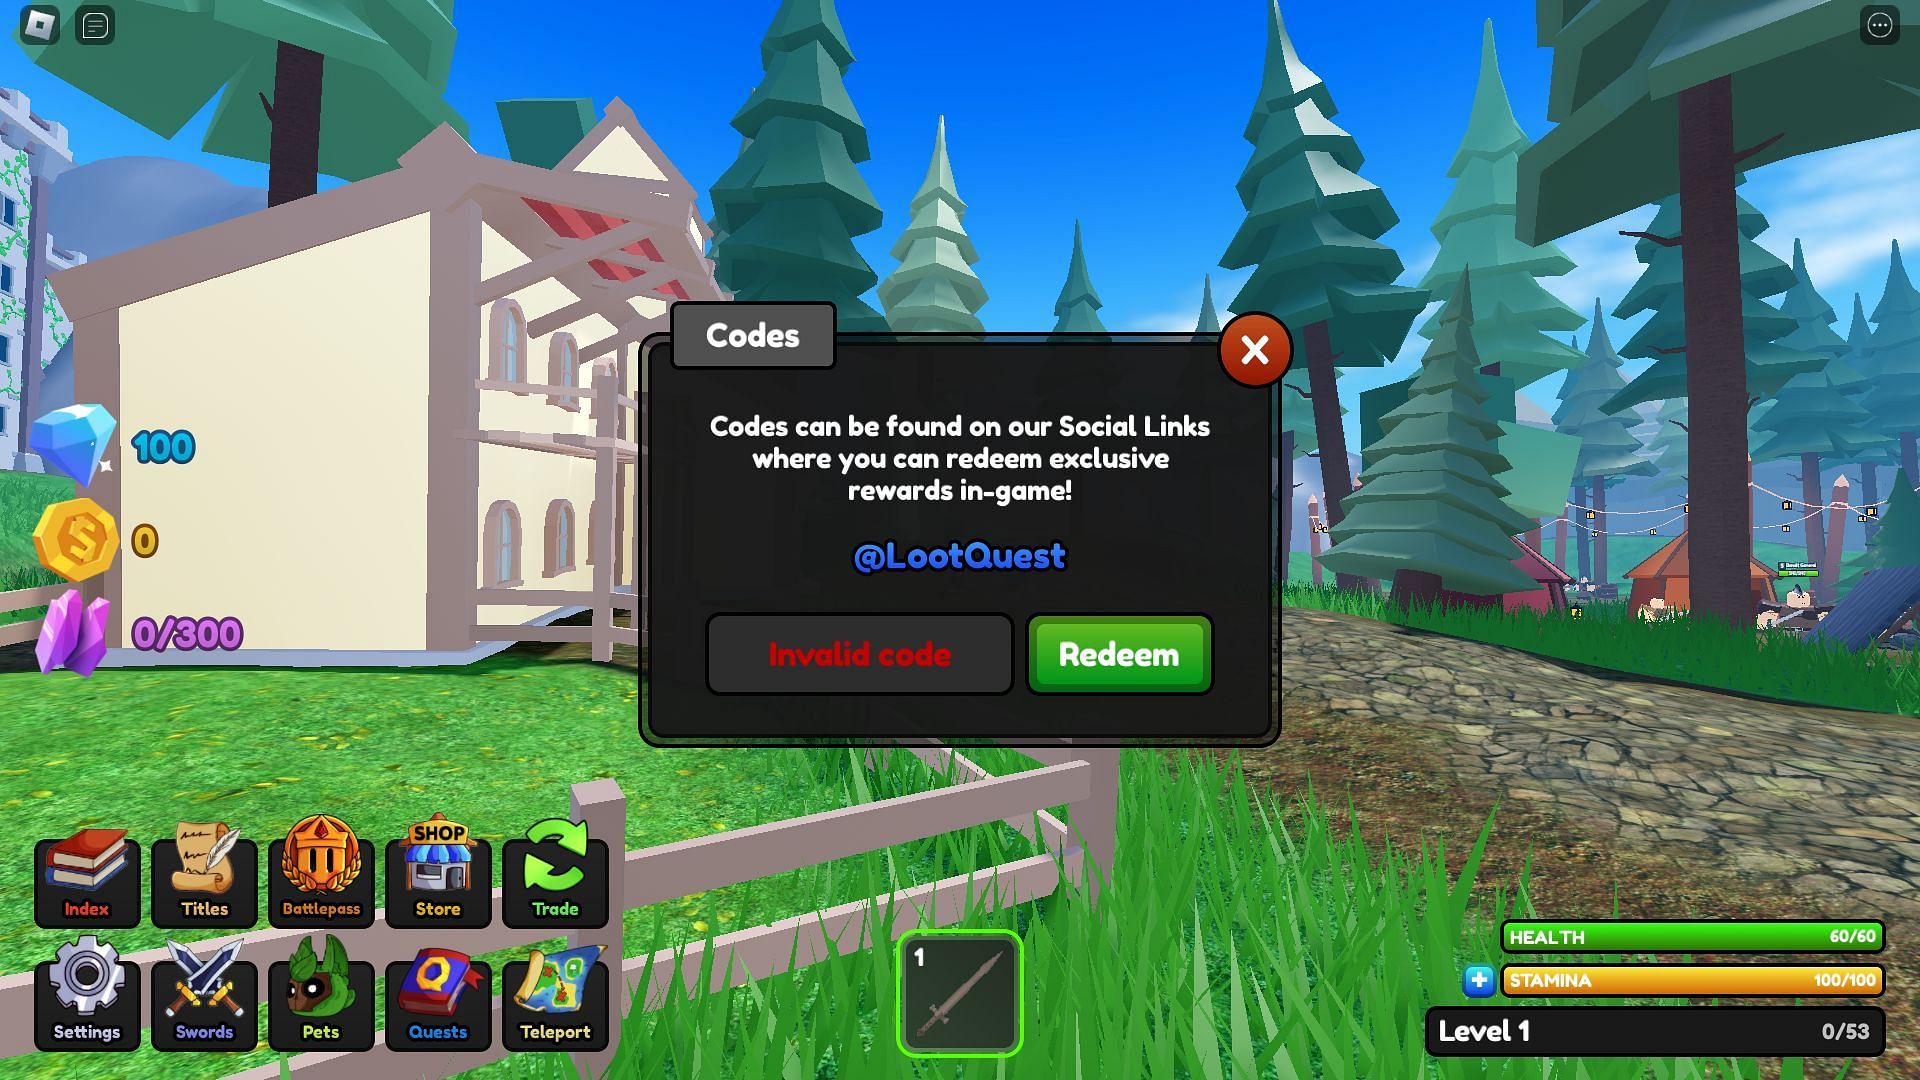 Troubleshooting codes for LootQuest (Image via Roblox)